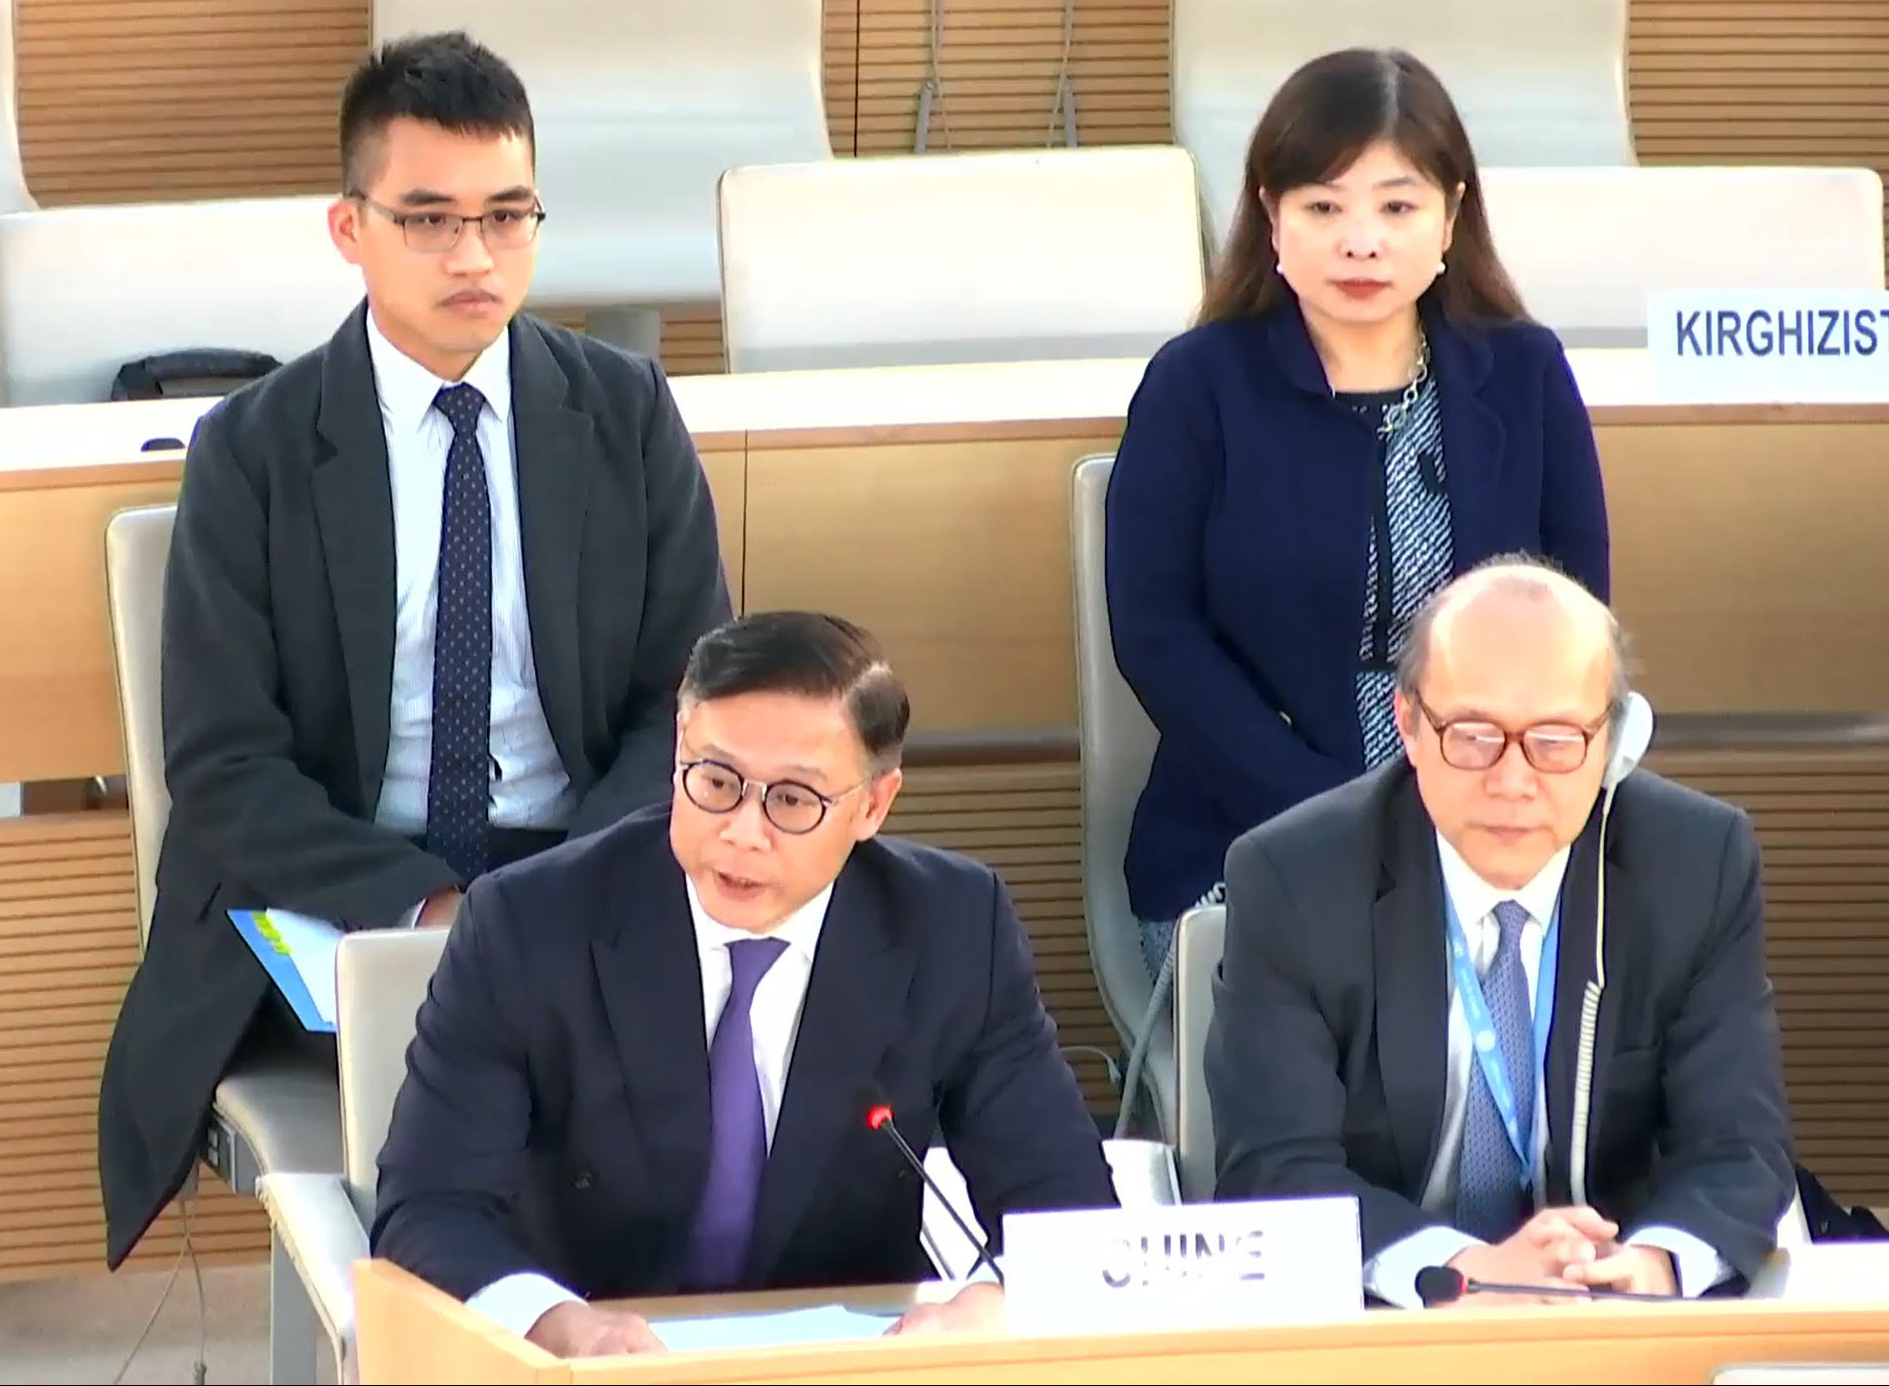 The Deputy Secretary for Justice, Mr Cheung Kwok-kwan (front row, left), today (March 20, Geneva time) delivers a speech on the Basic Law Article 23 legislation at the 55th regular session of the United Nations Human Rights Council in Geneva, Switzerland.